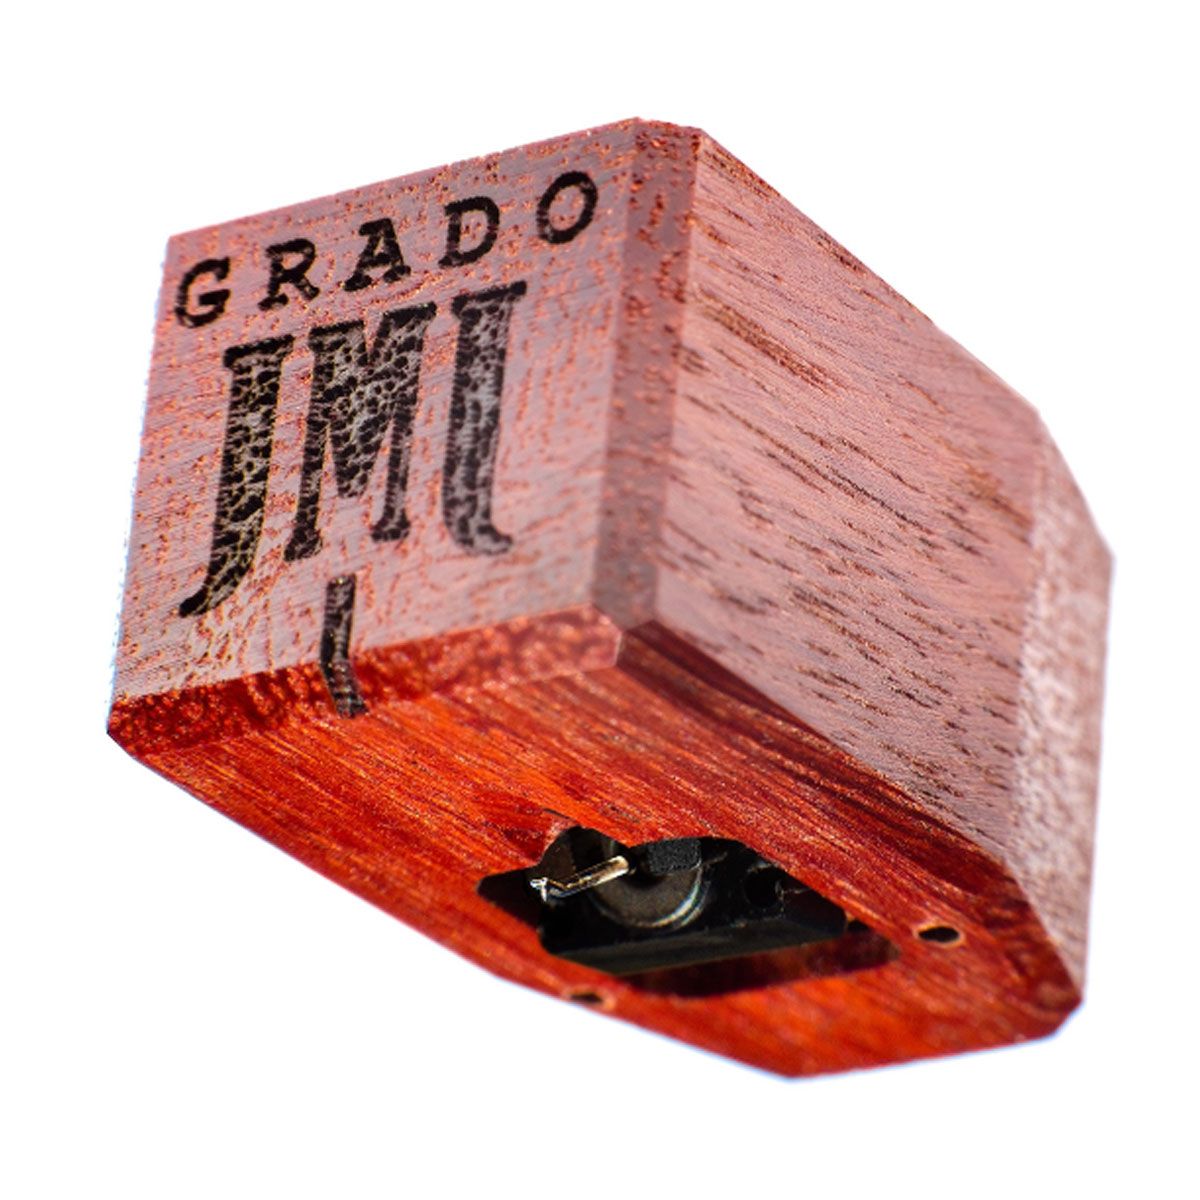 Grado Reference3 Phono Cartridge - Low Output, front view